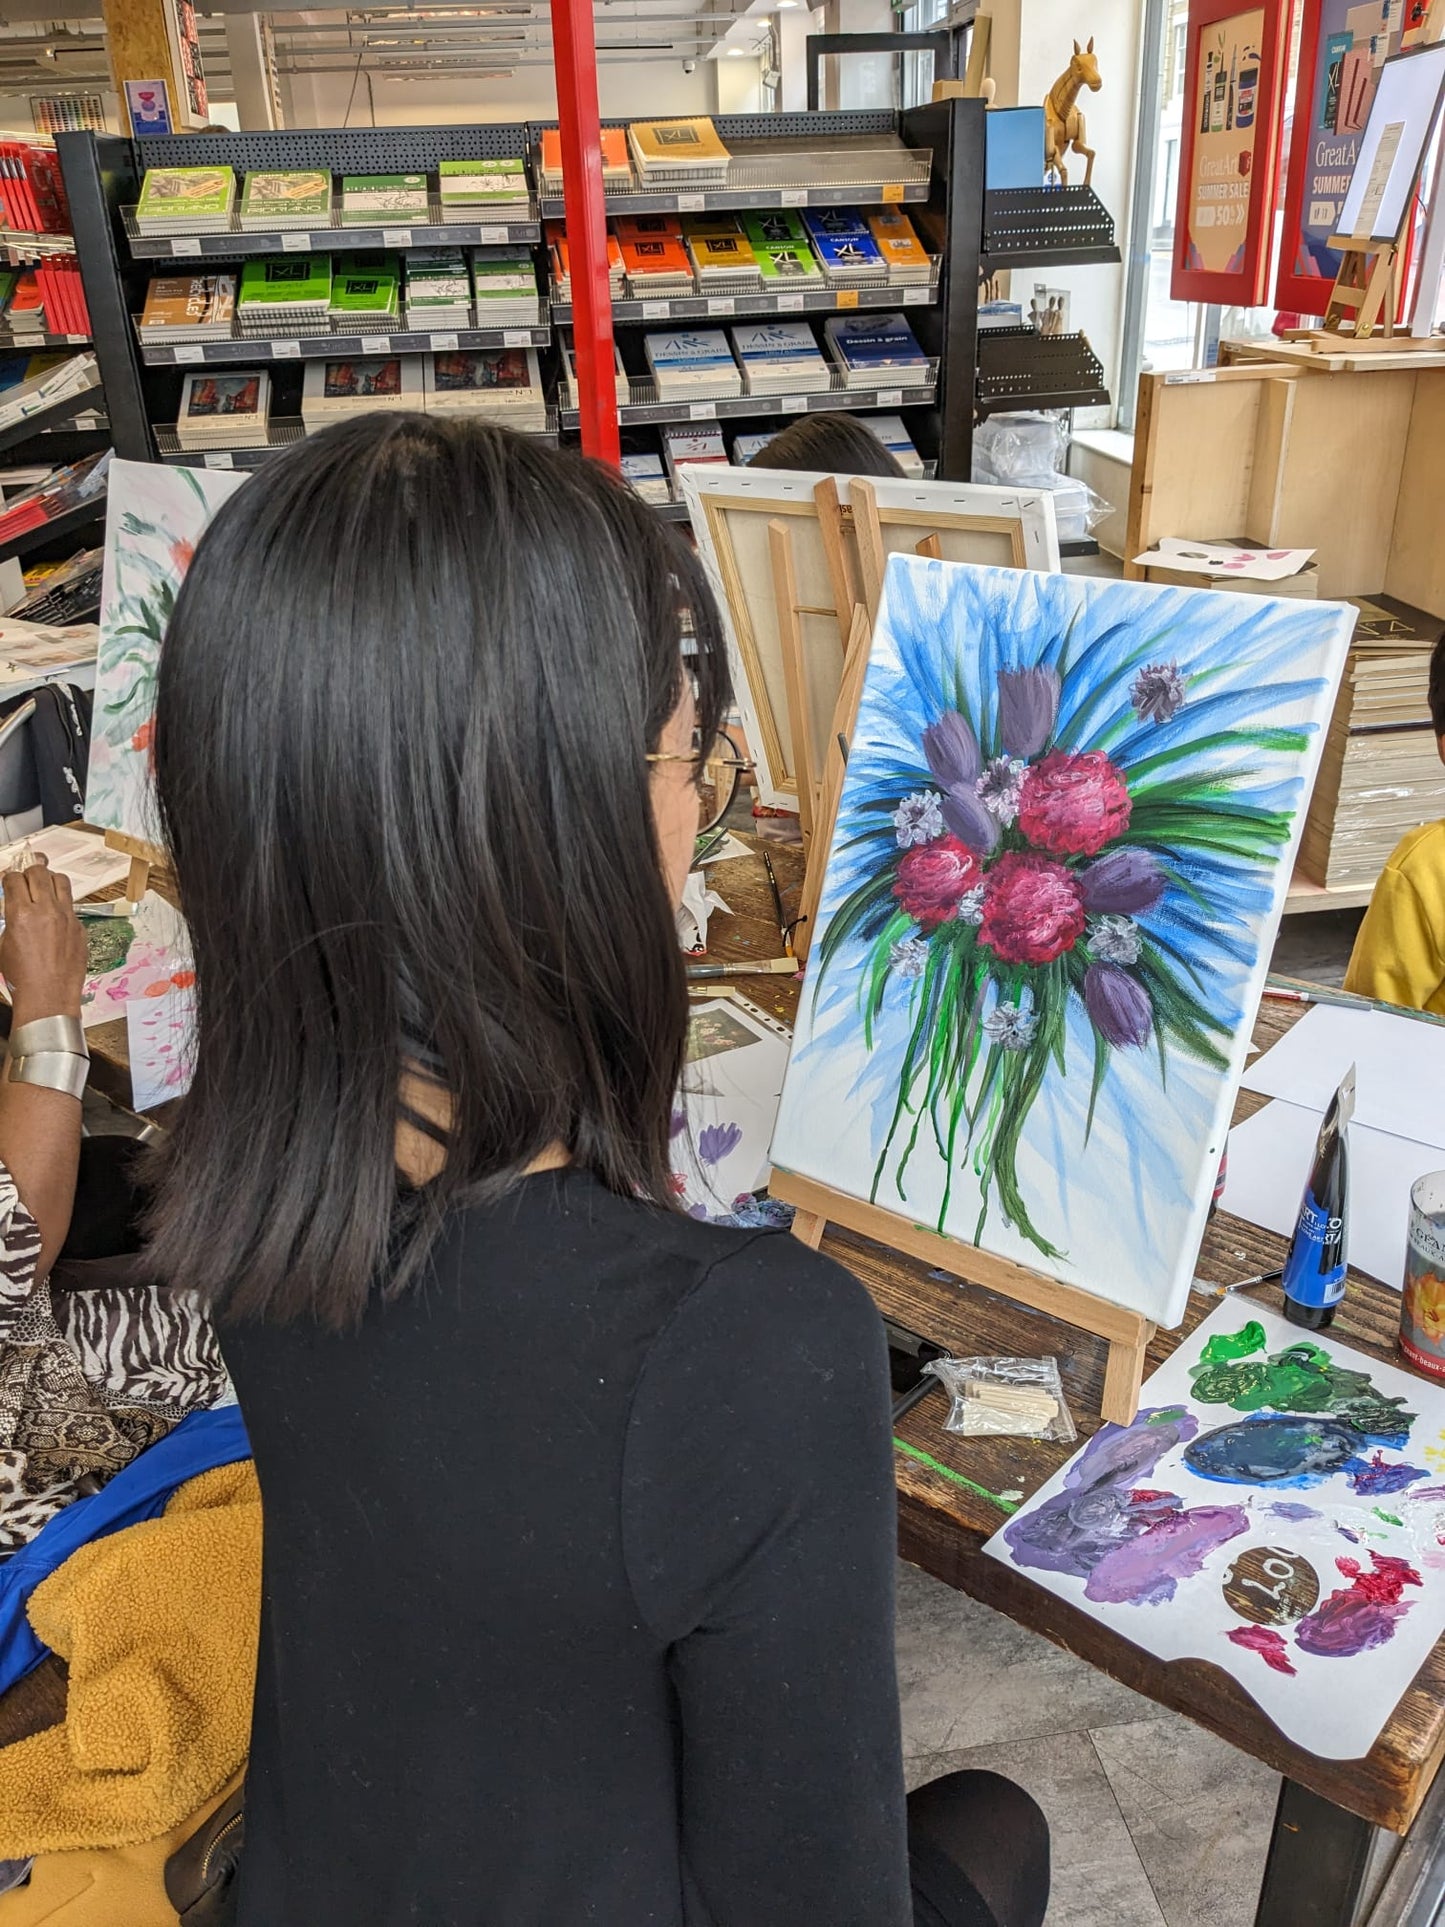 ABSTRACT FLOWER BOUQUETS  - Painting Workshop at The Howard Centre, Welwyn Garden City - 20th SEPTEMBER 2023